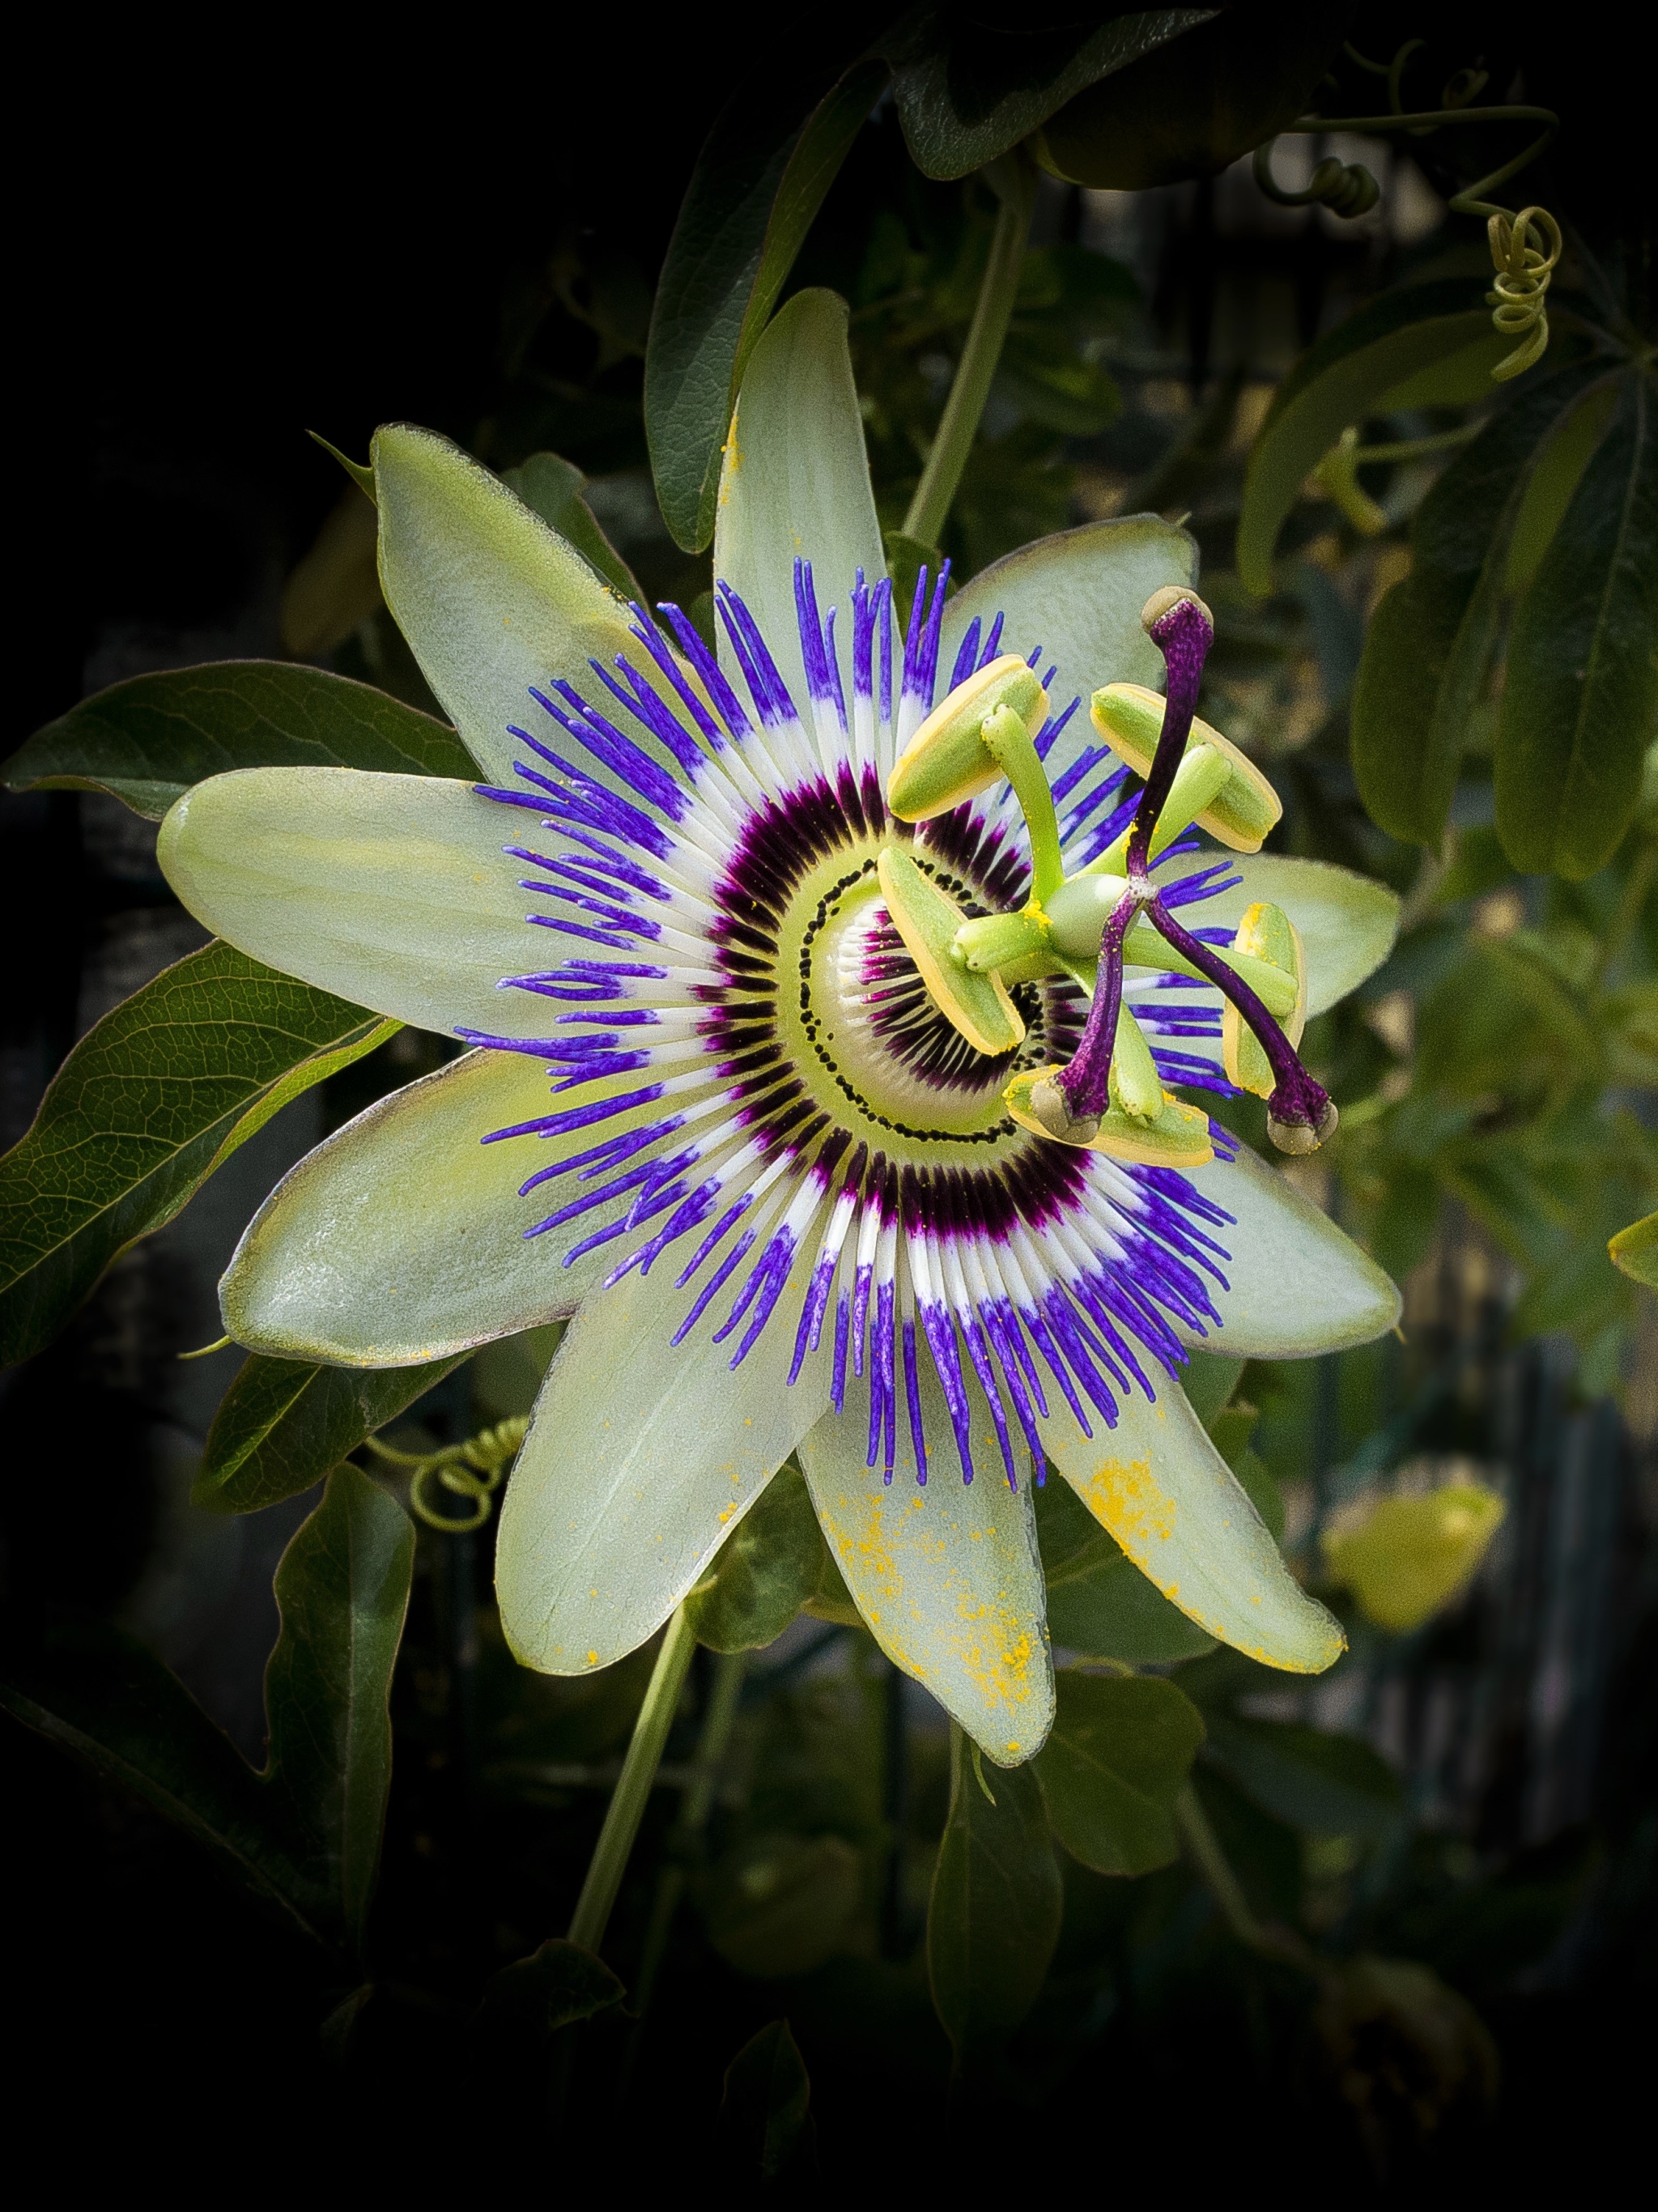 earth, passion flower, nature, flower, flowers